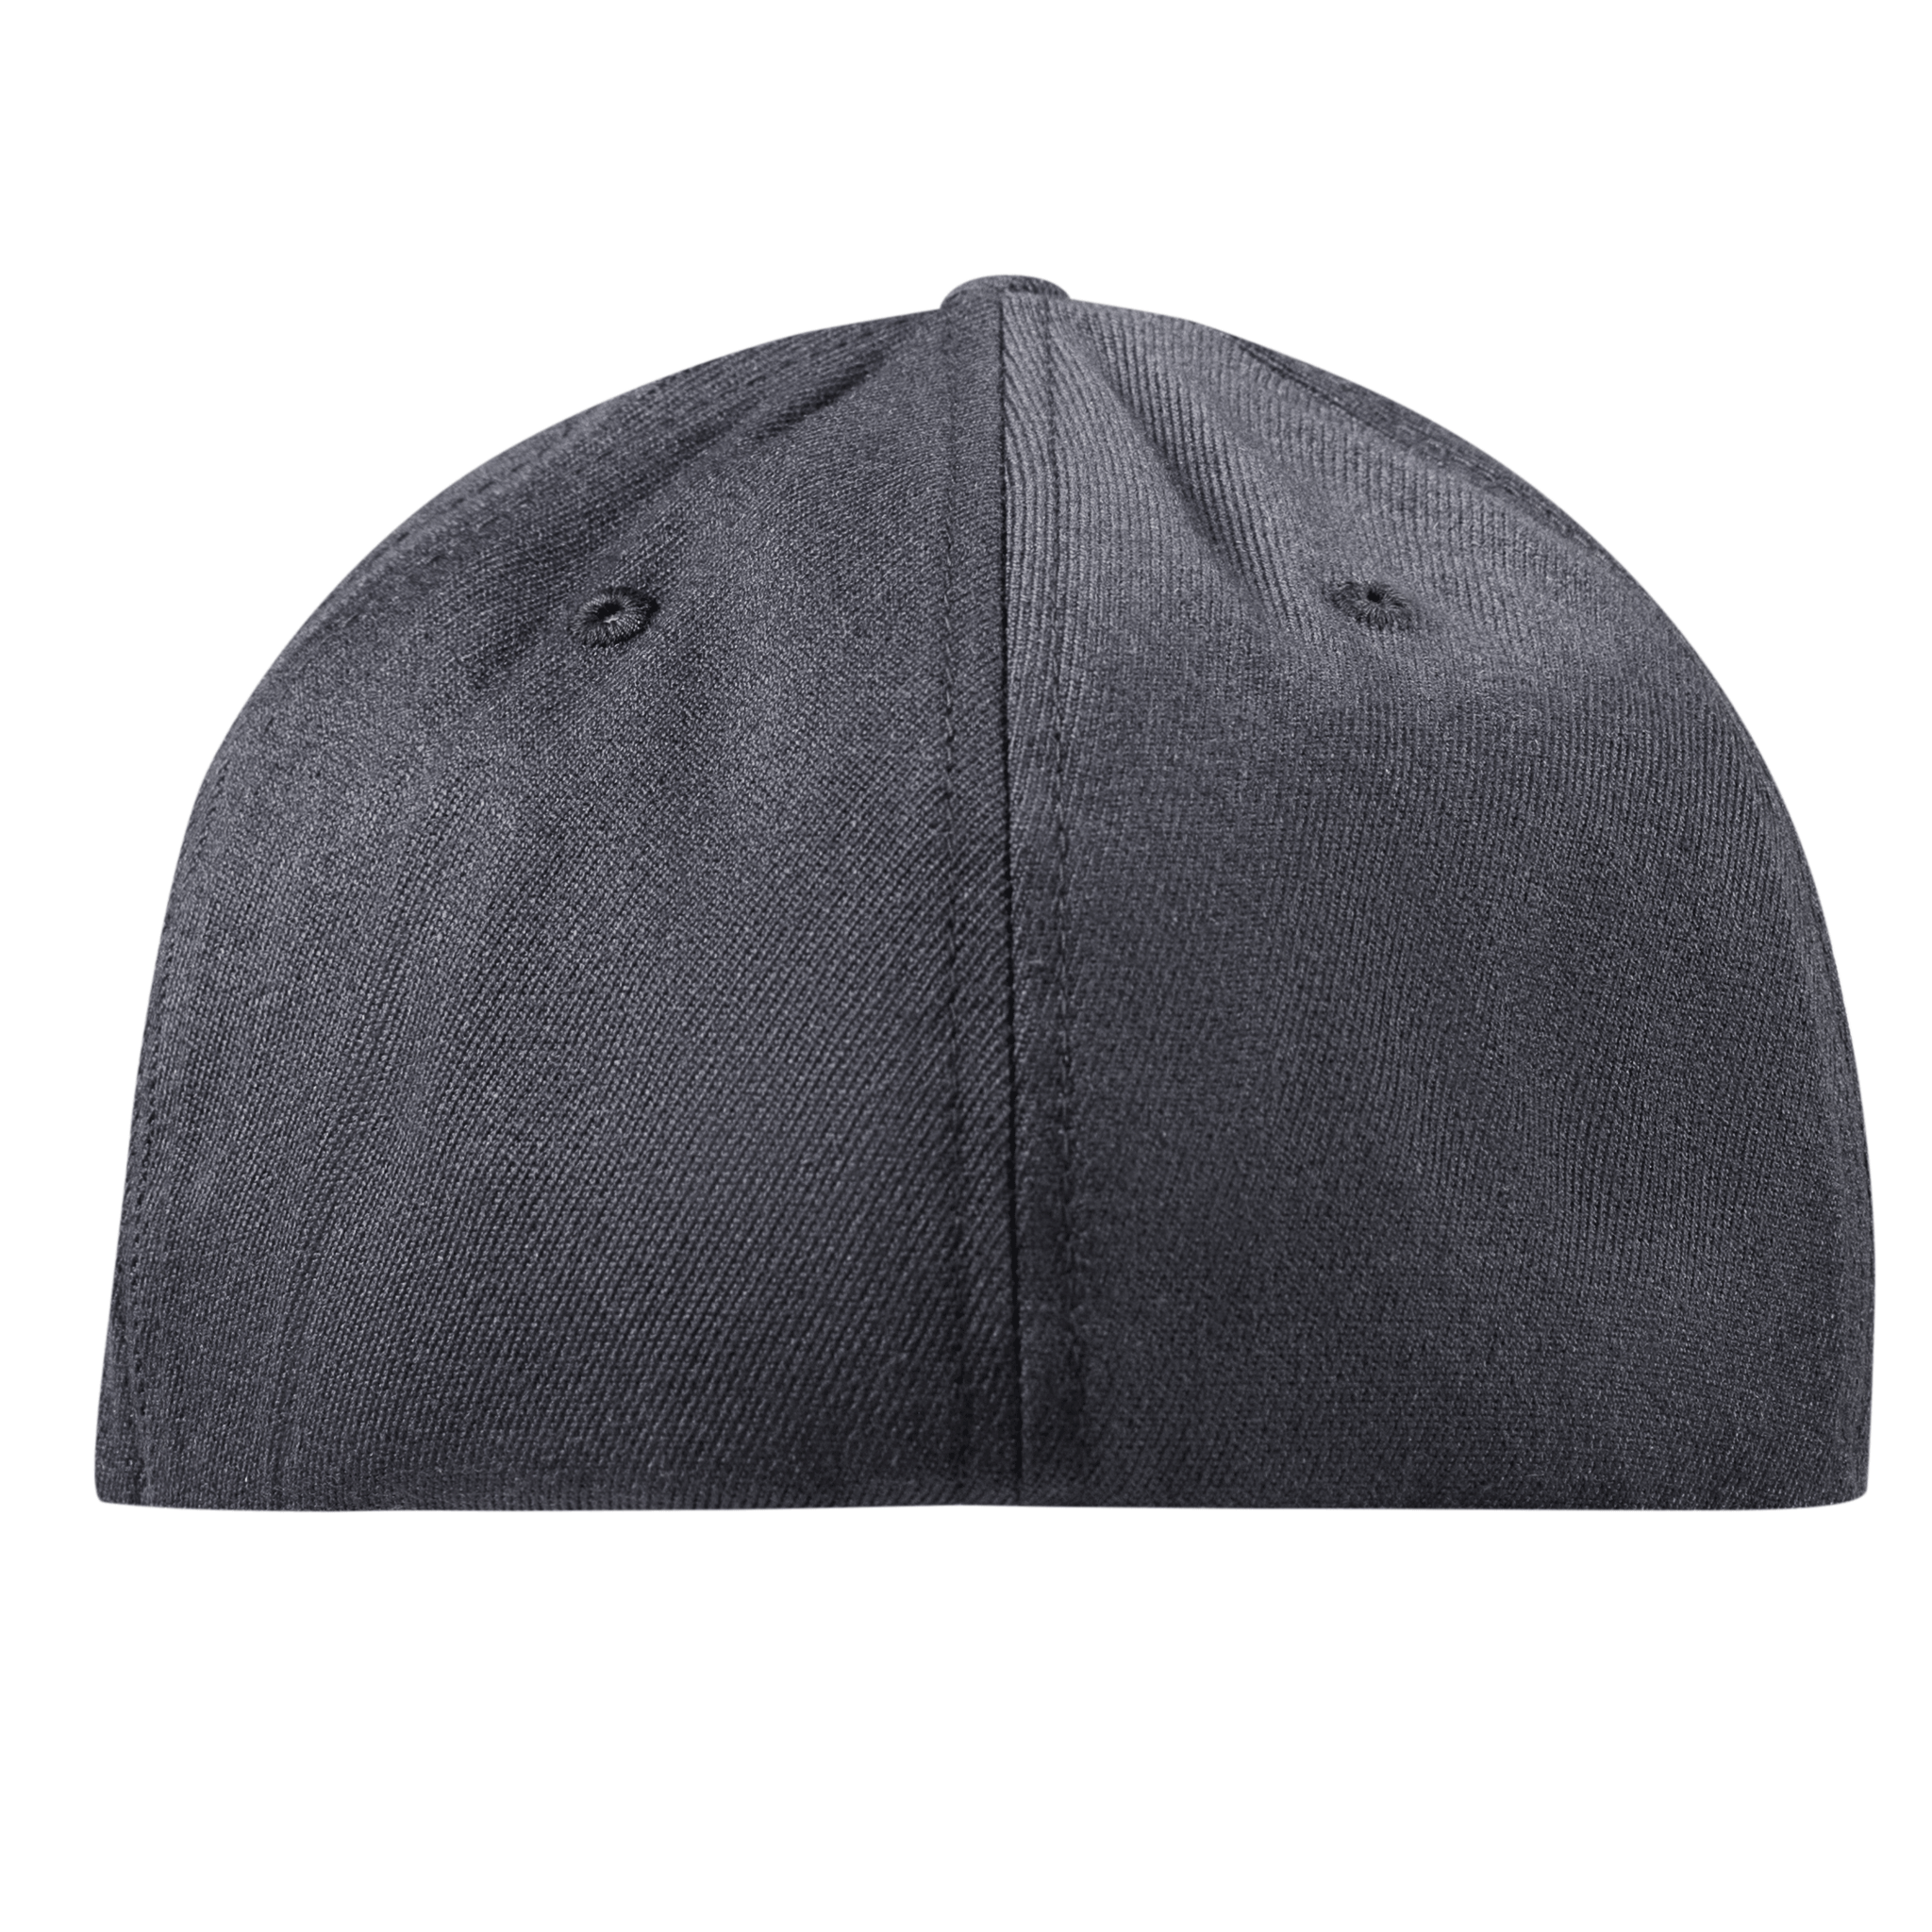 We The People Skull PVC Flexfit Fitted Back Charcoal